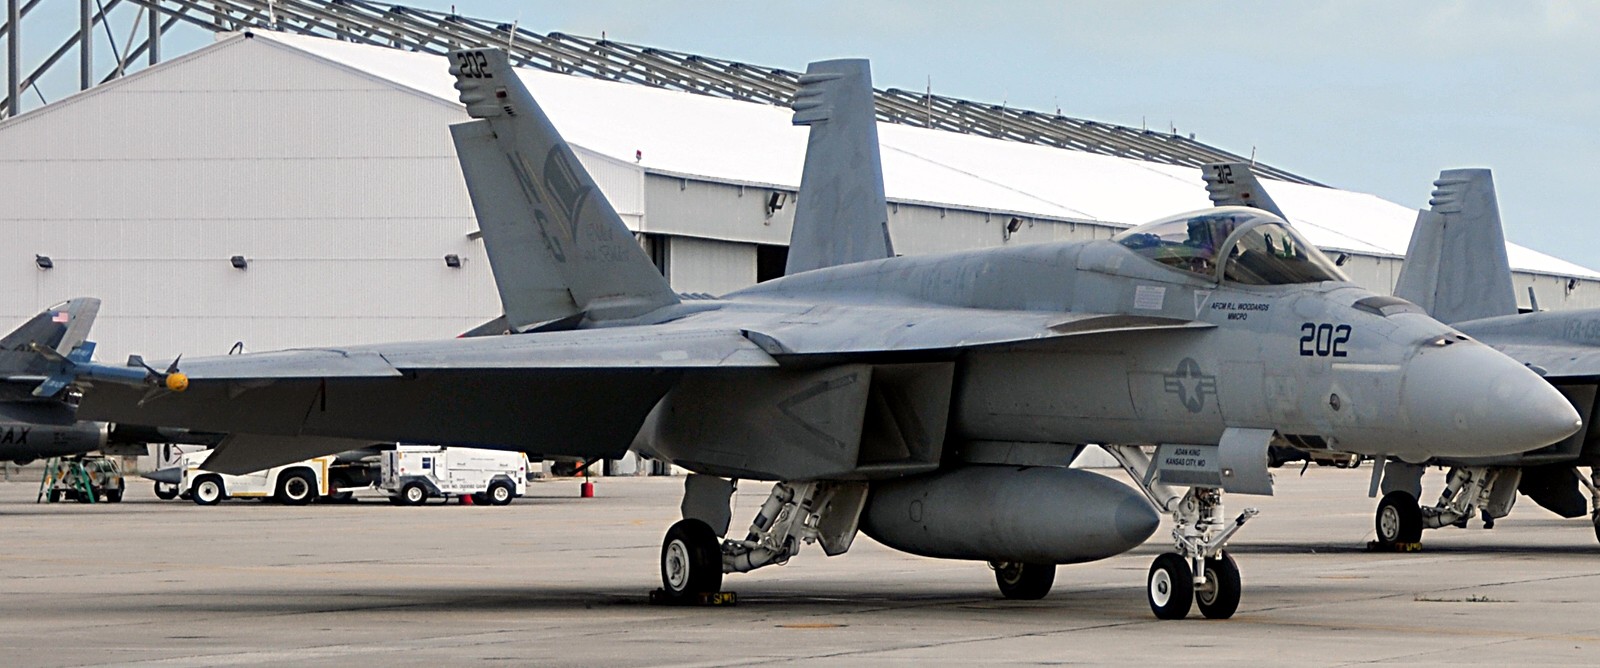 vfa-14 tophatters strike fighter squadron f/a-18e super hornet cvw-9 us navy nas key west florida 19